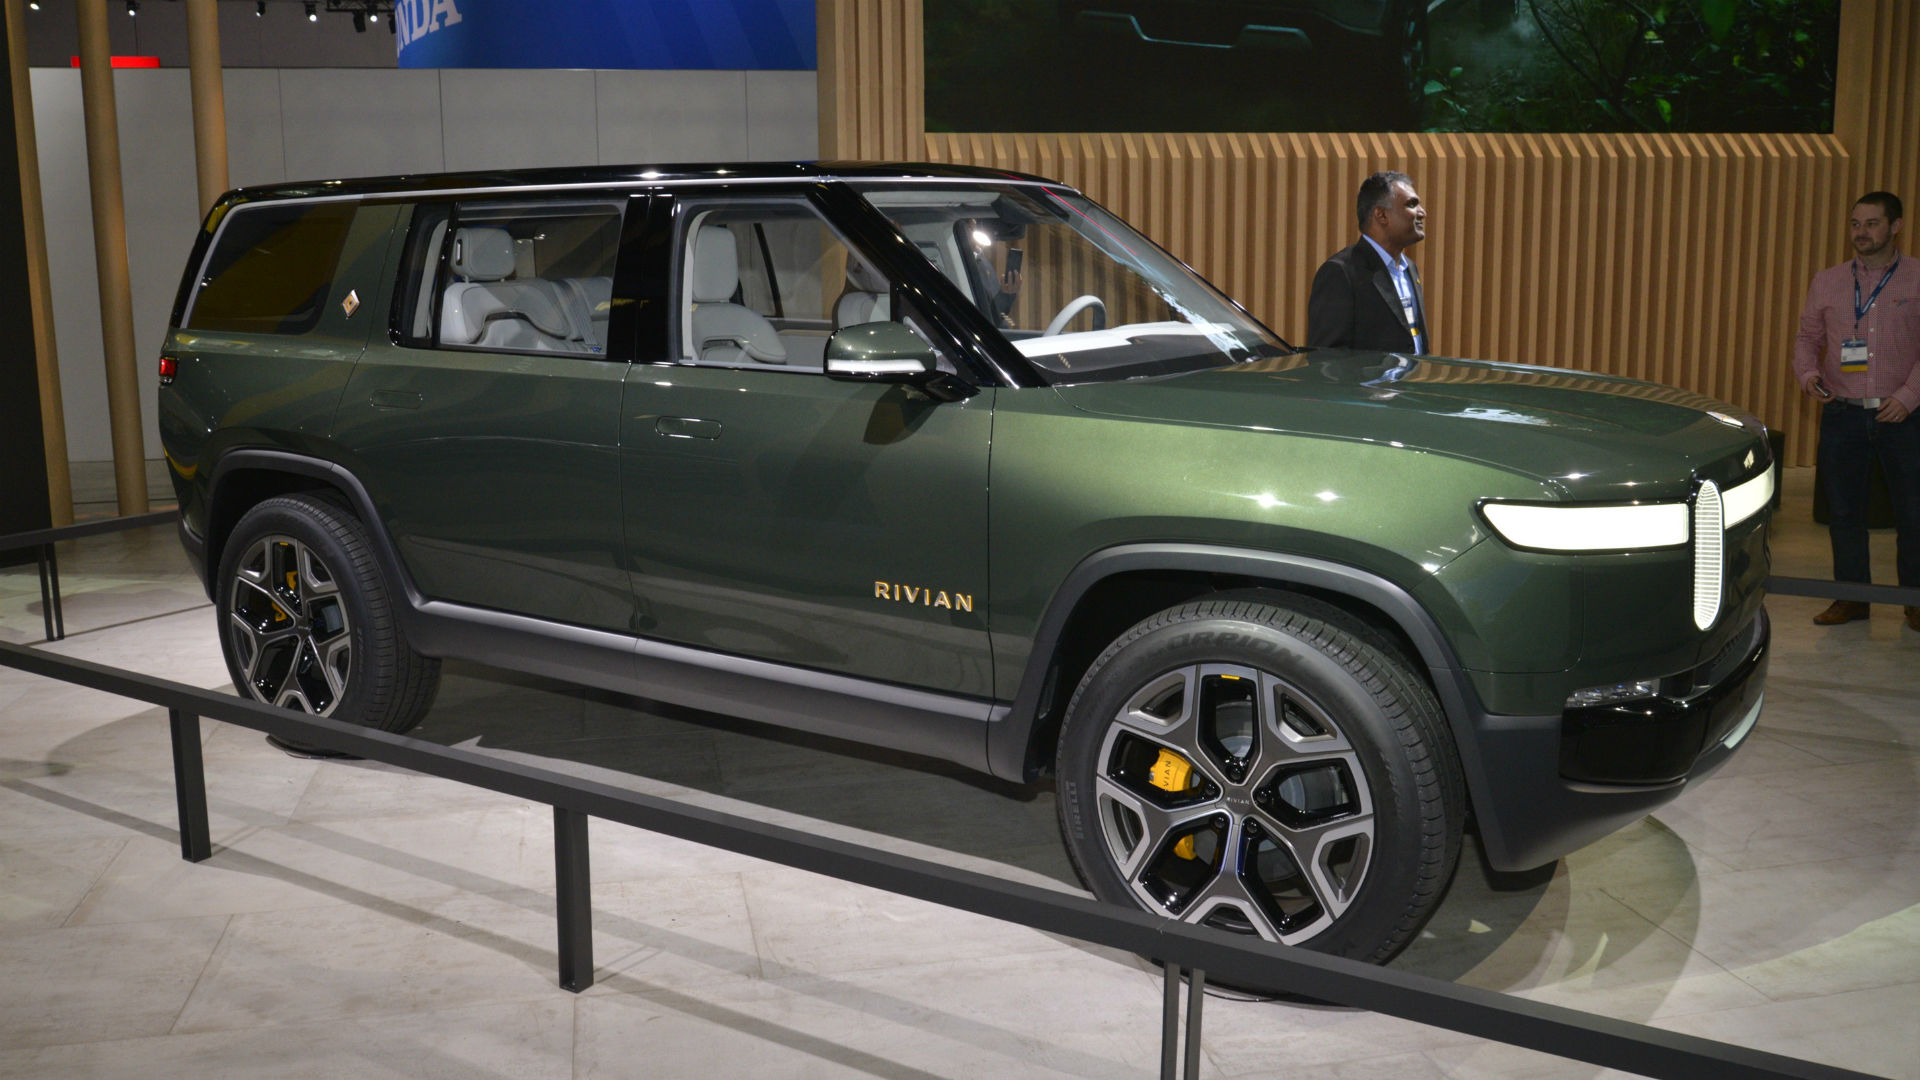 Rivian files patent for first responder seat